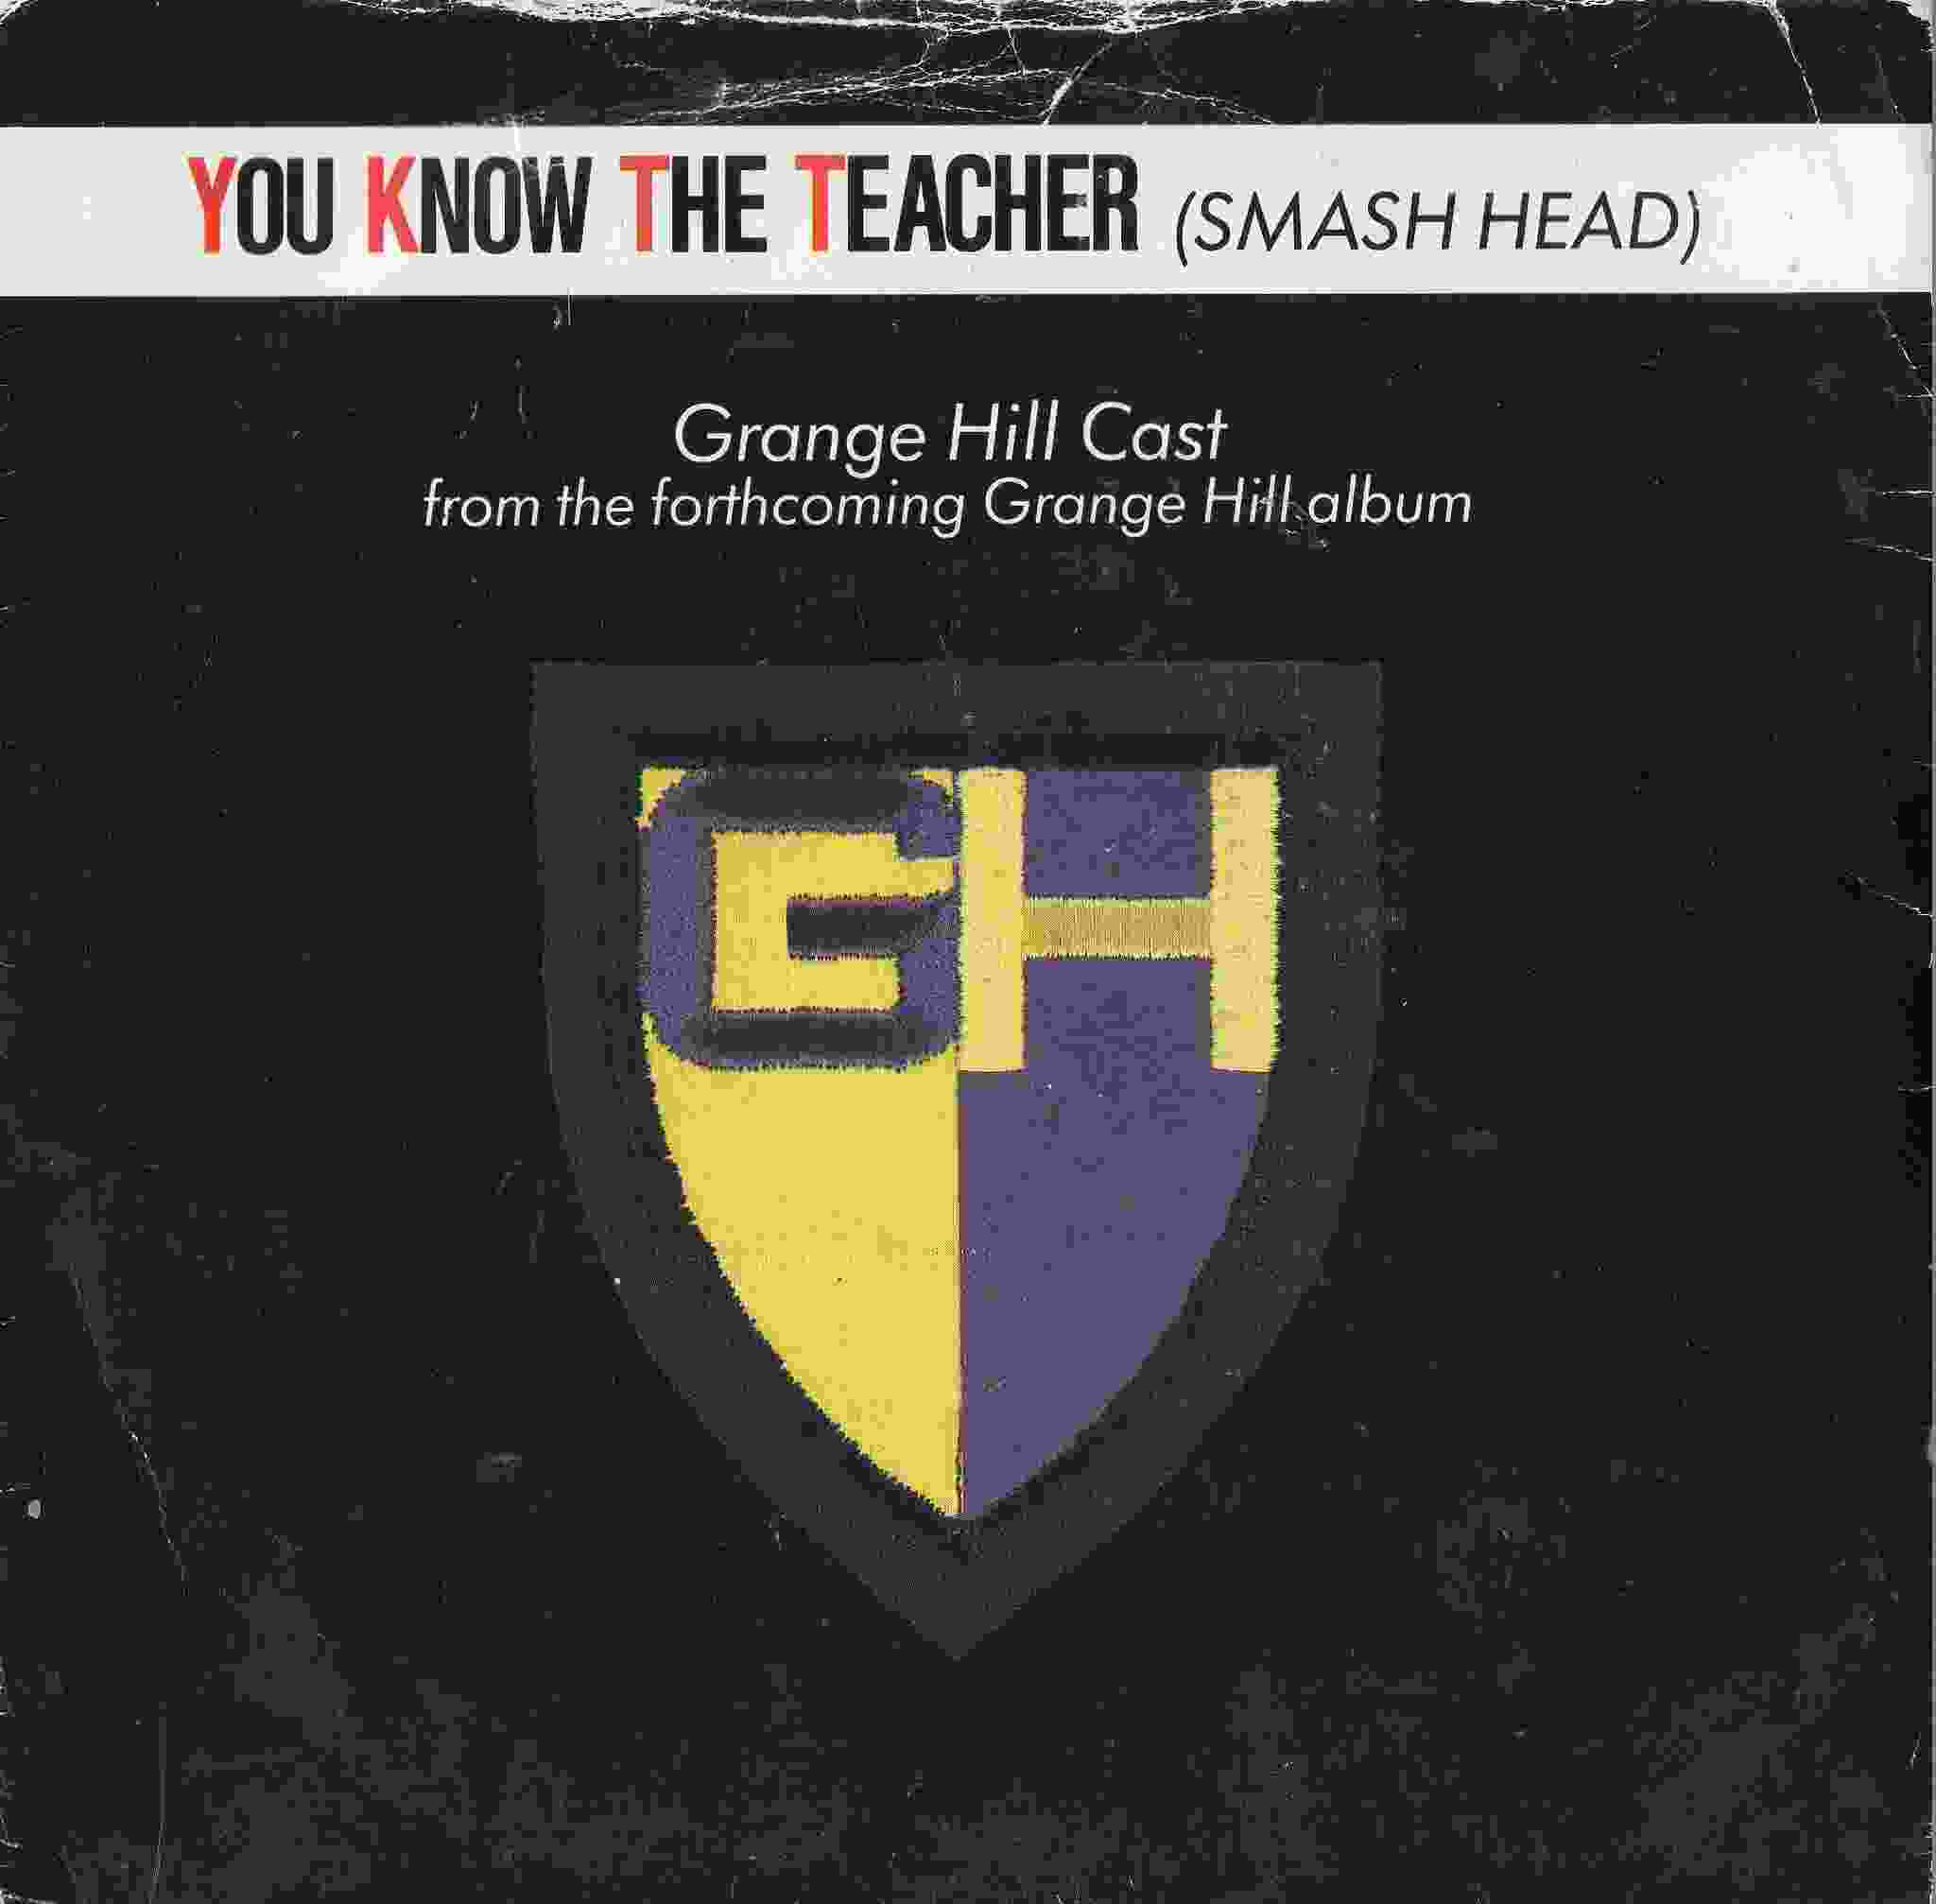 Picture of RESL 205 You know the teacher (Grange Hill) by artist Grange Hill Cast from the BBC singles - Records and Tapes library